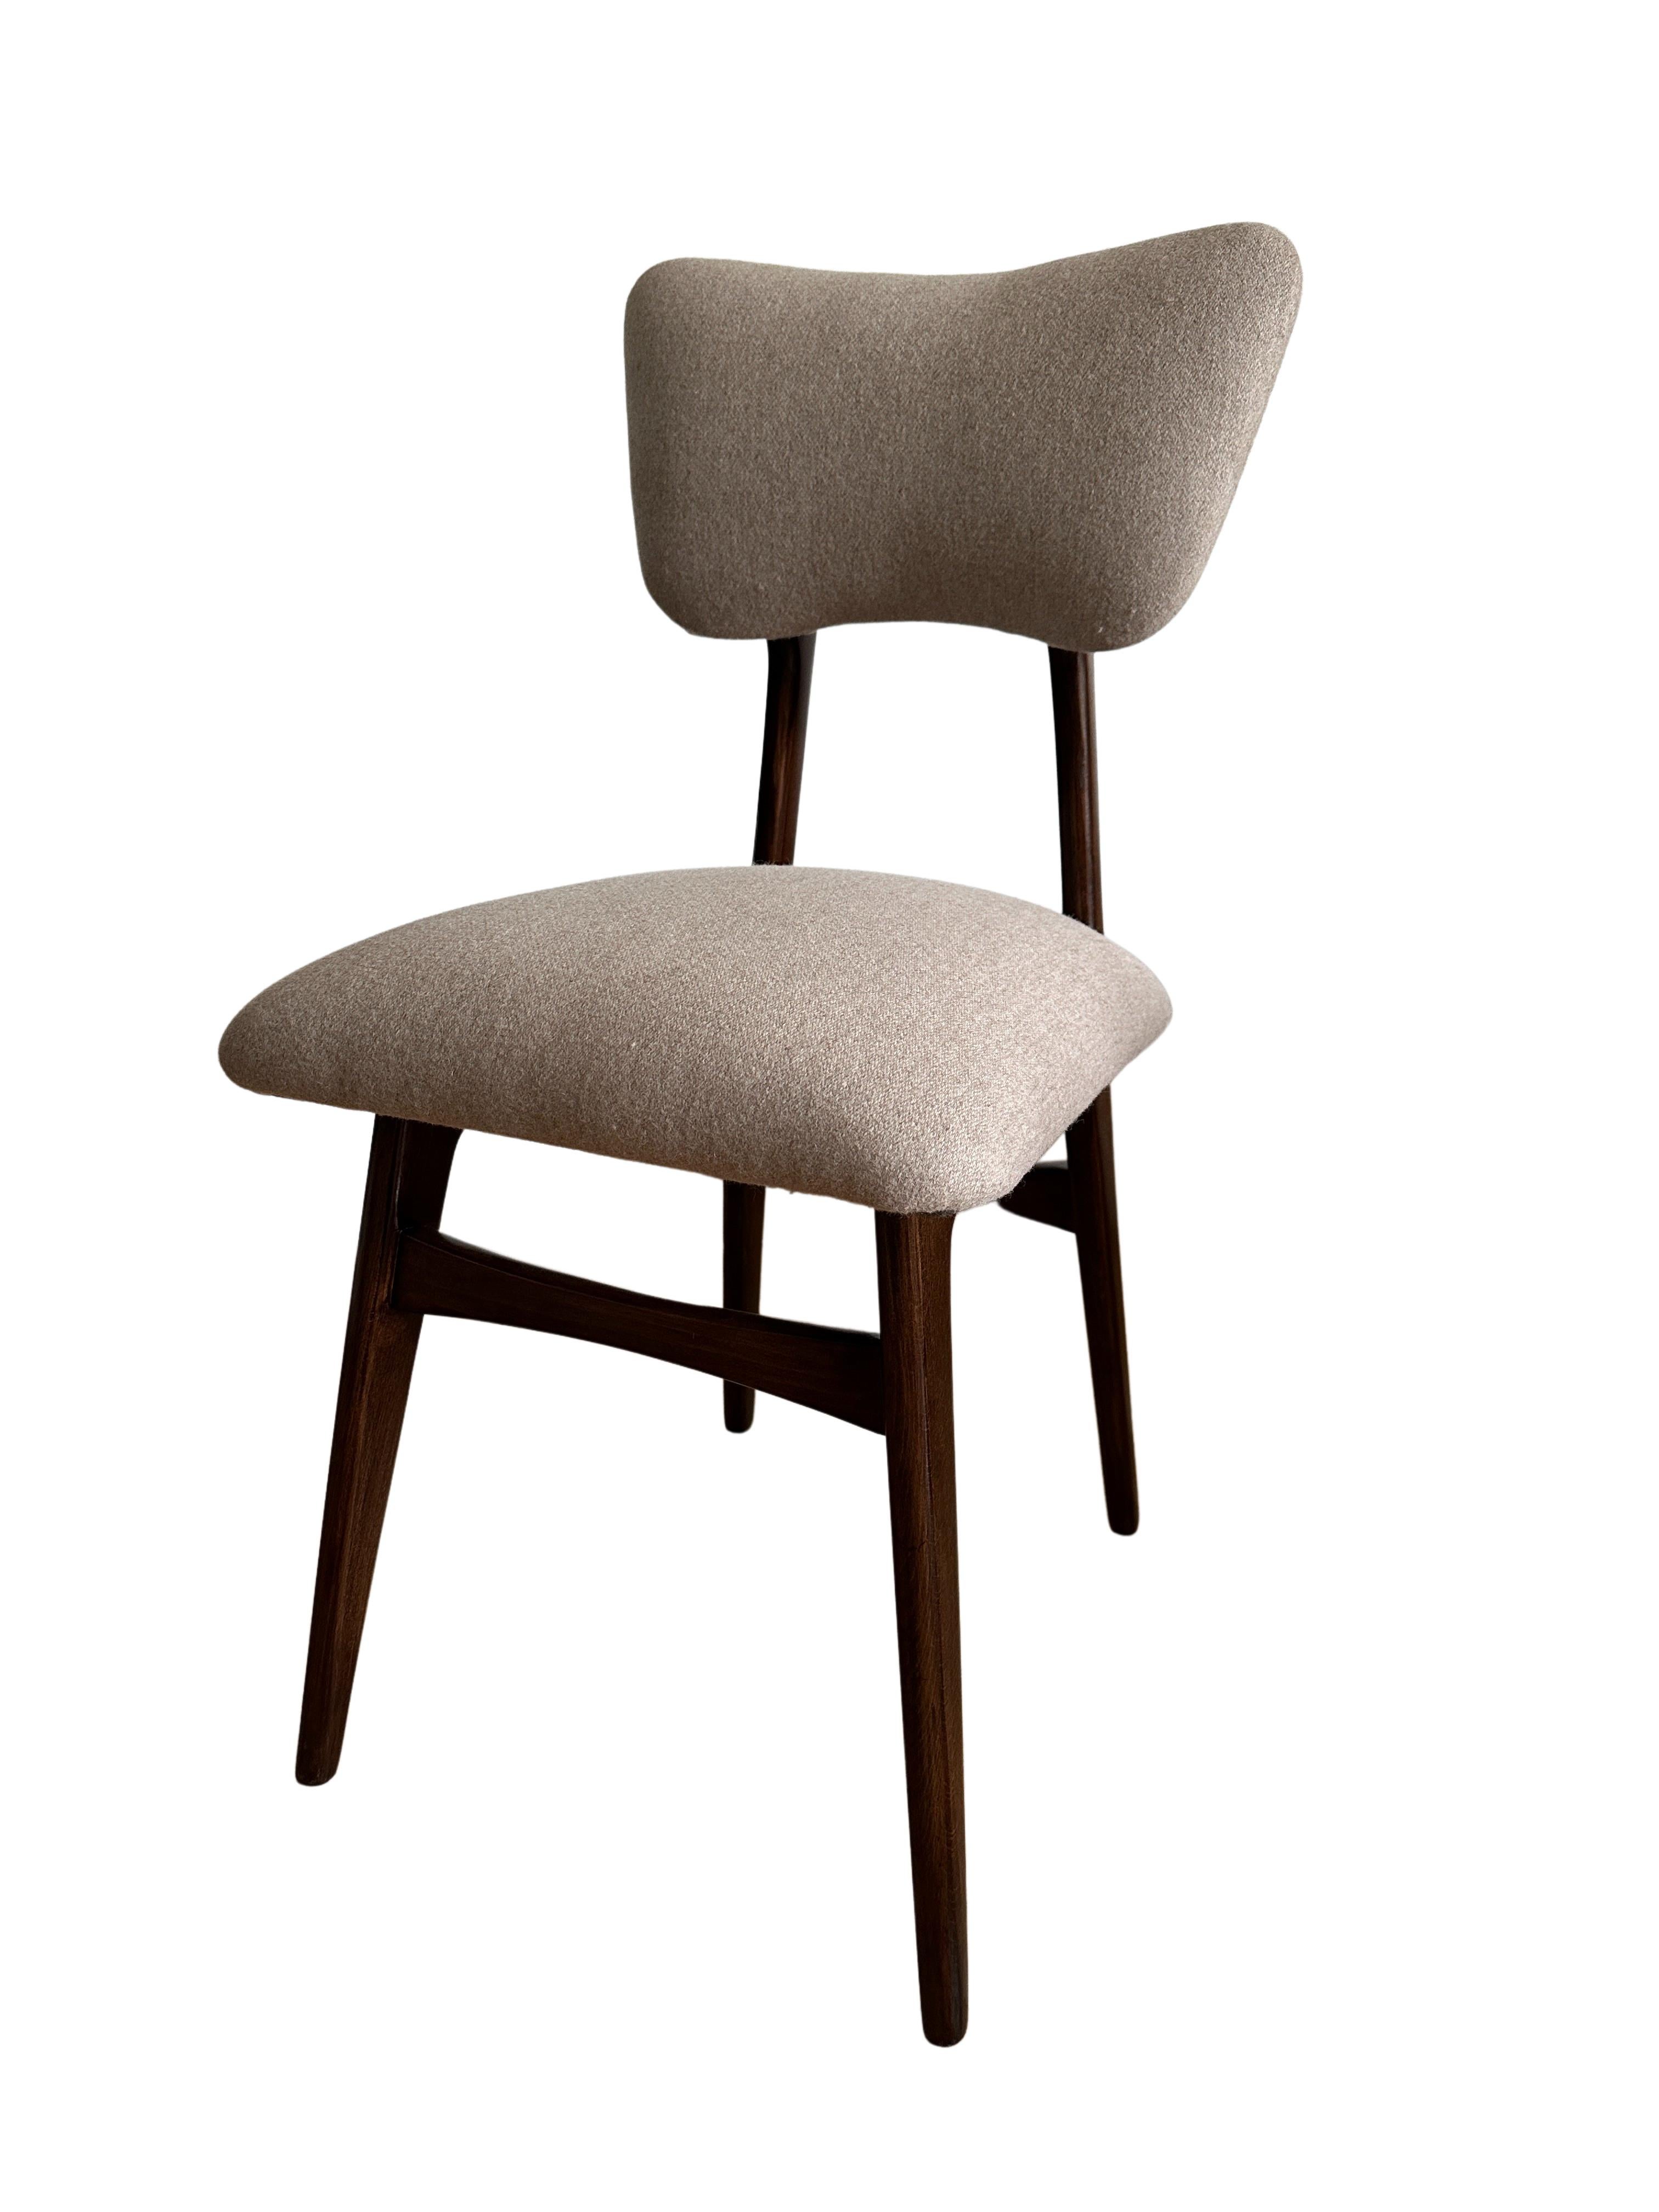 Midcentury Dining Chair in Beige Wool Upholstery, Poland, 1960s For Sale 1